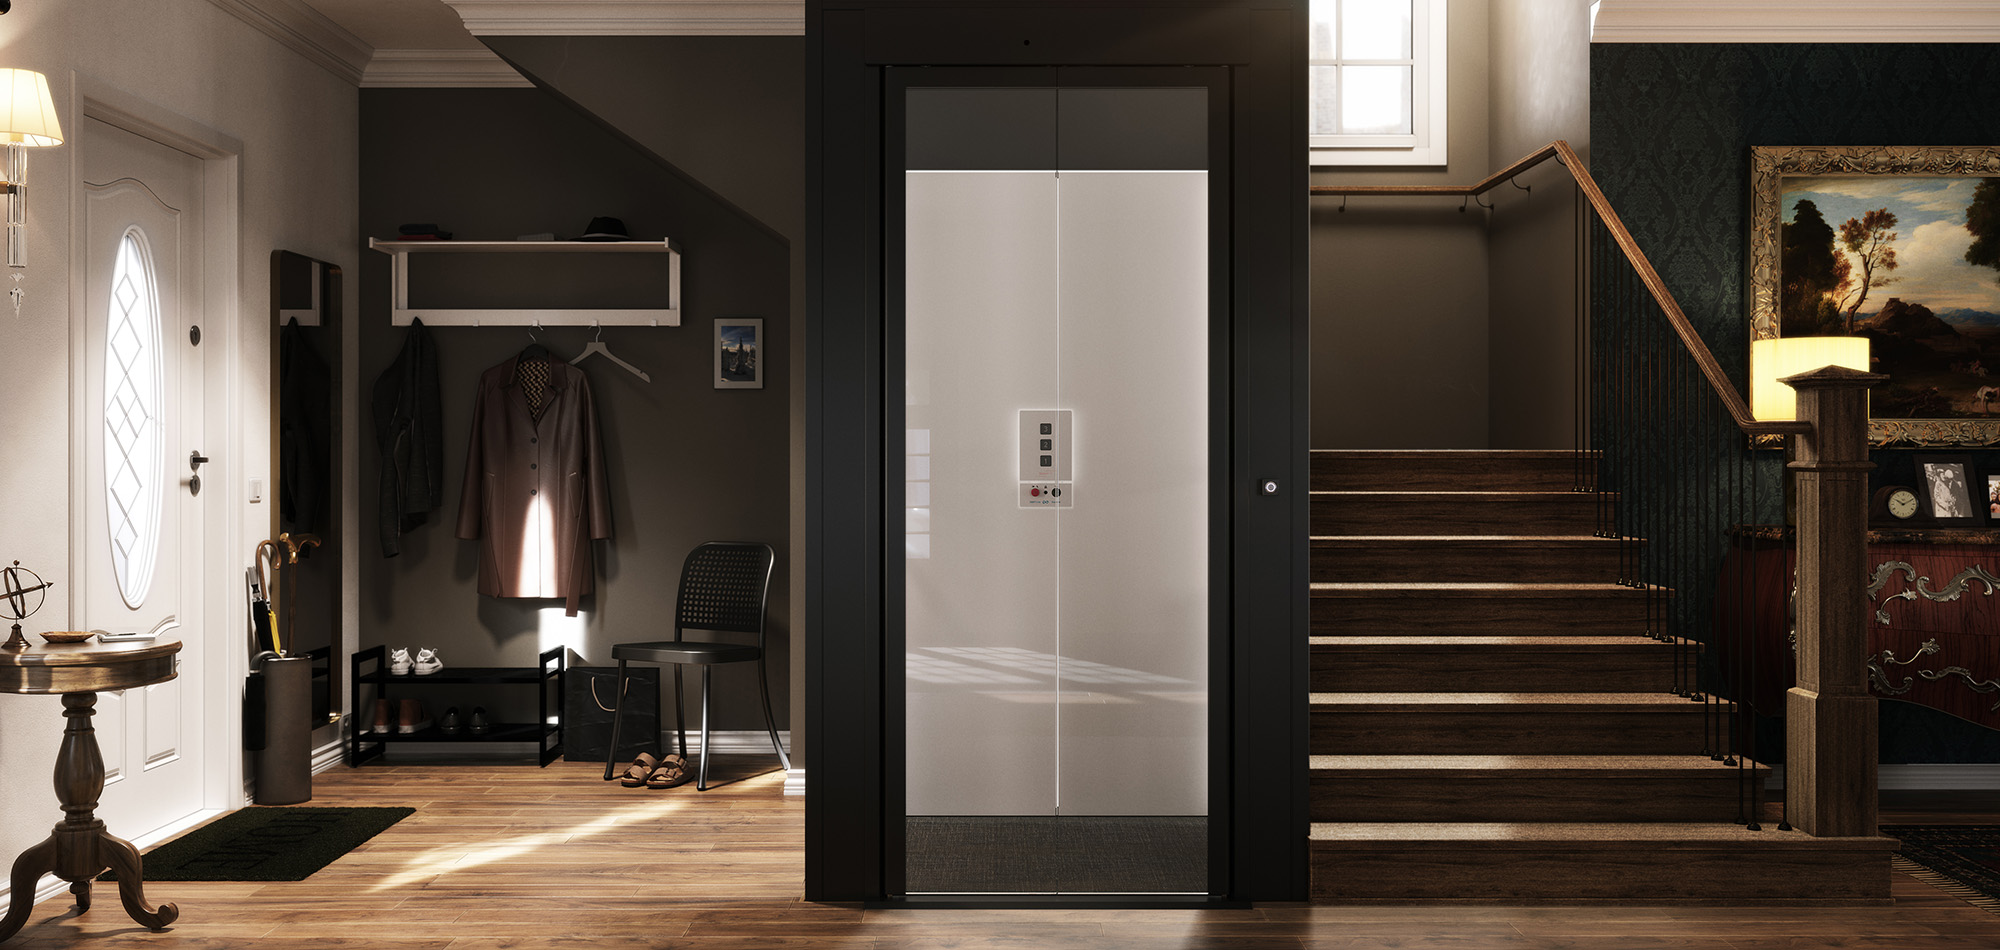 A small elevator lift installed in a Swedish home. Picture 1.